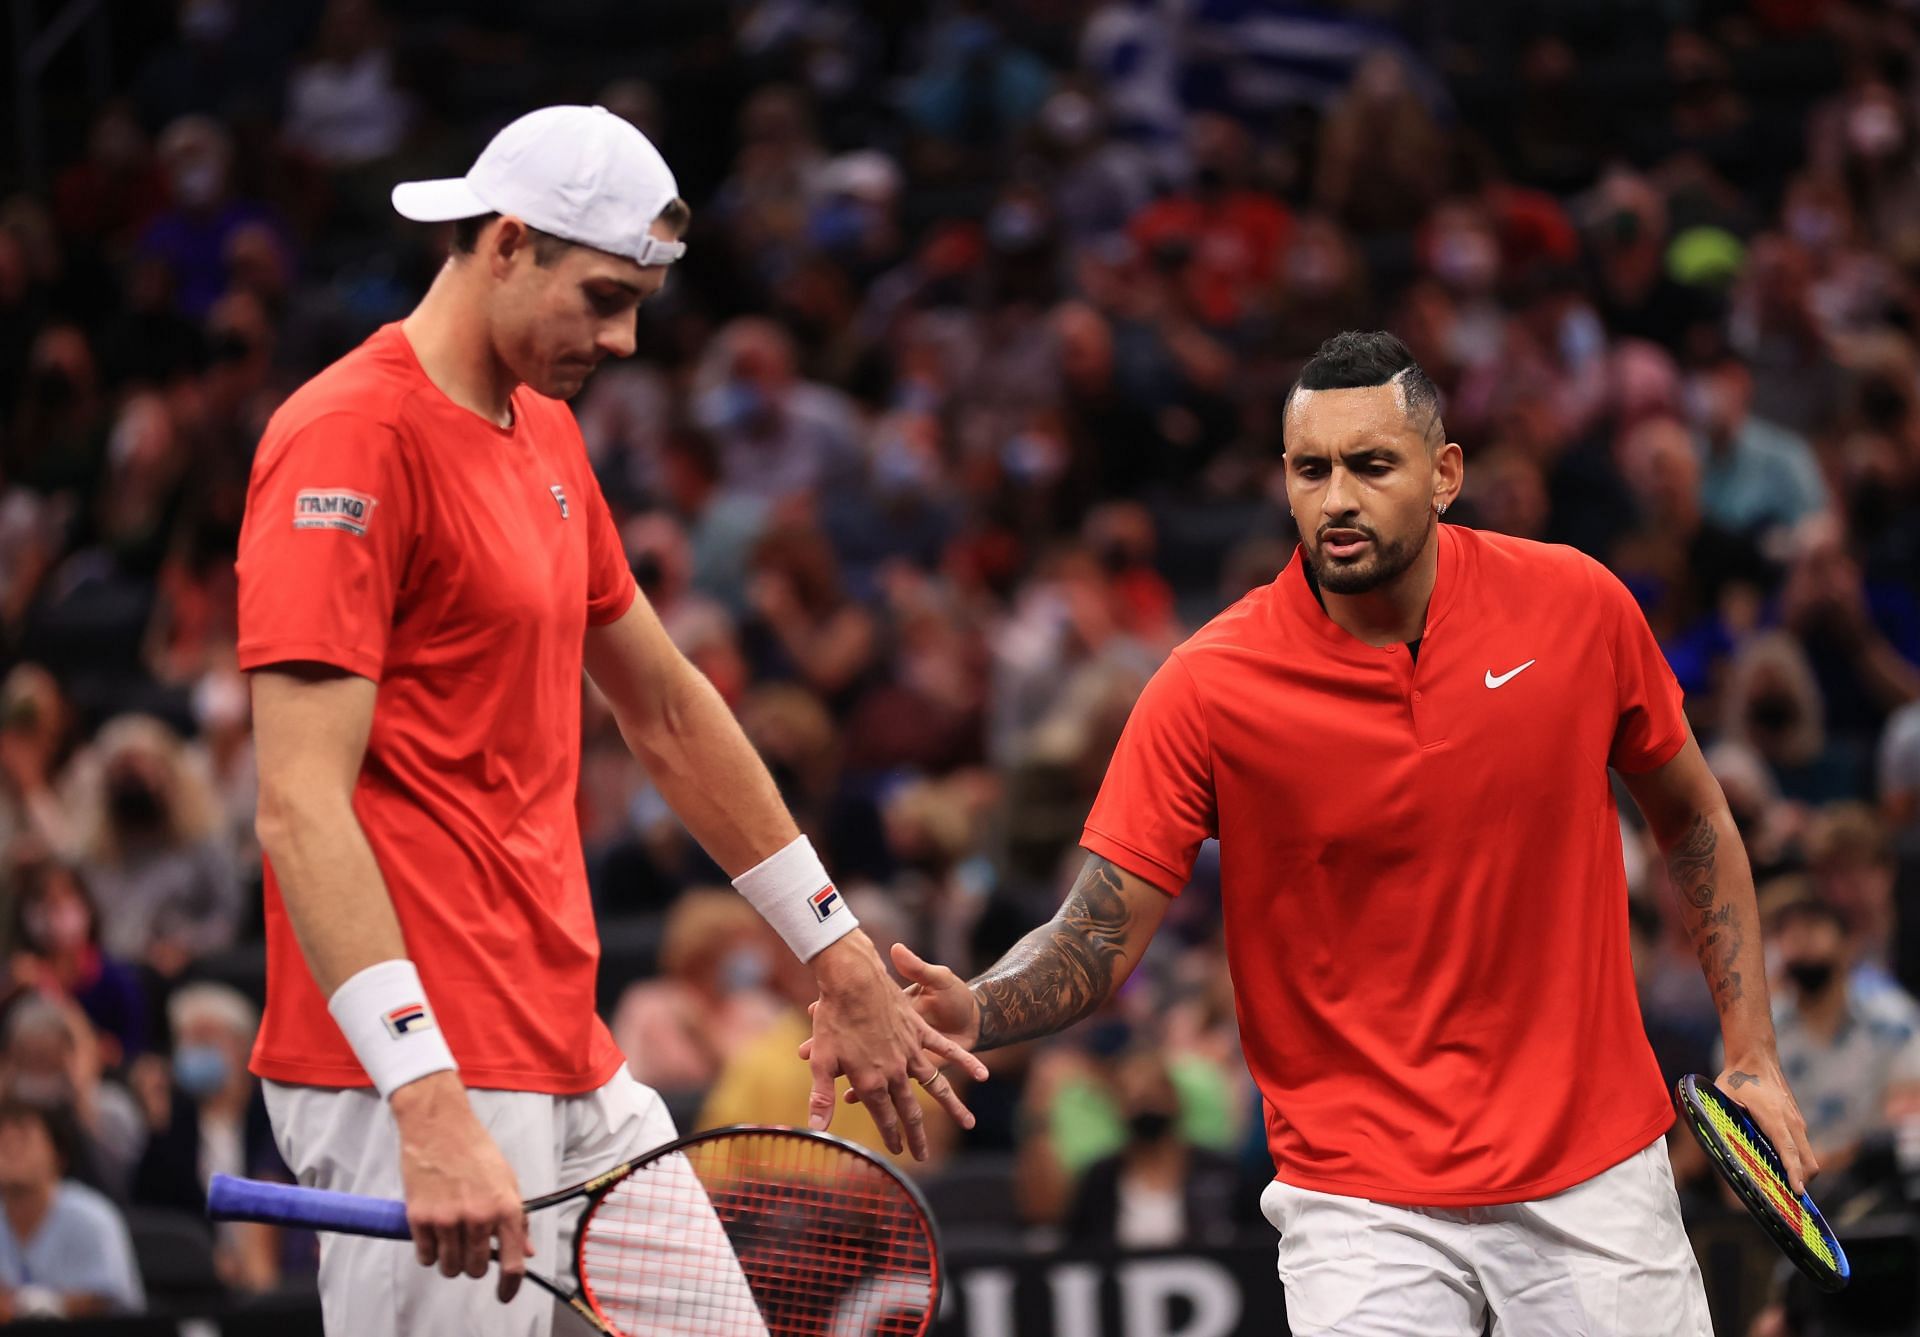 John Isner and Nick Kyrgios are two of the biggest stars at the 2022 Atlanta Open.